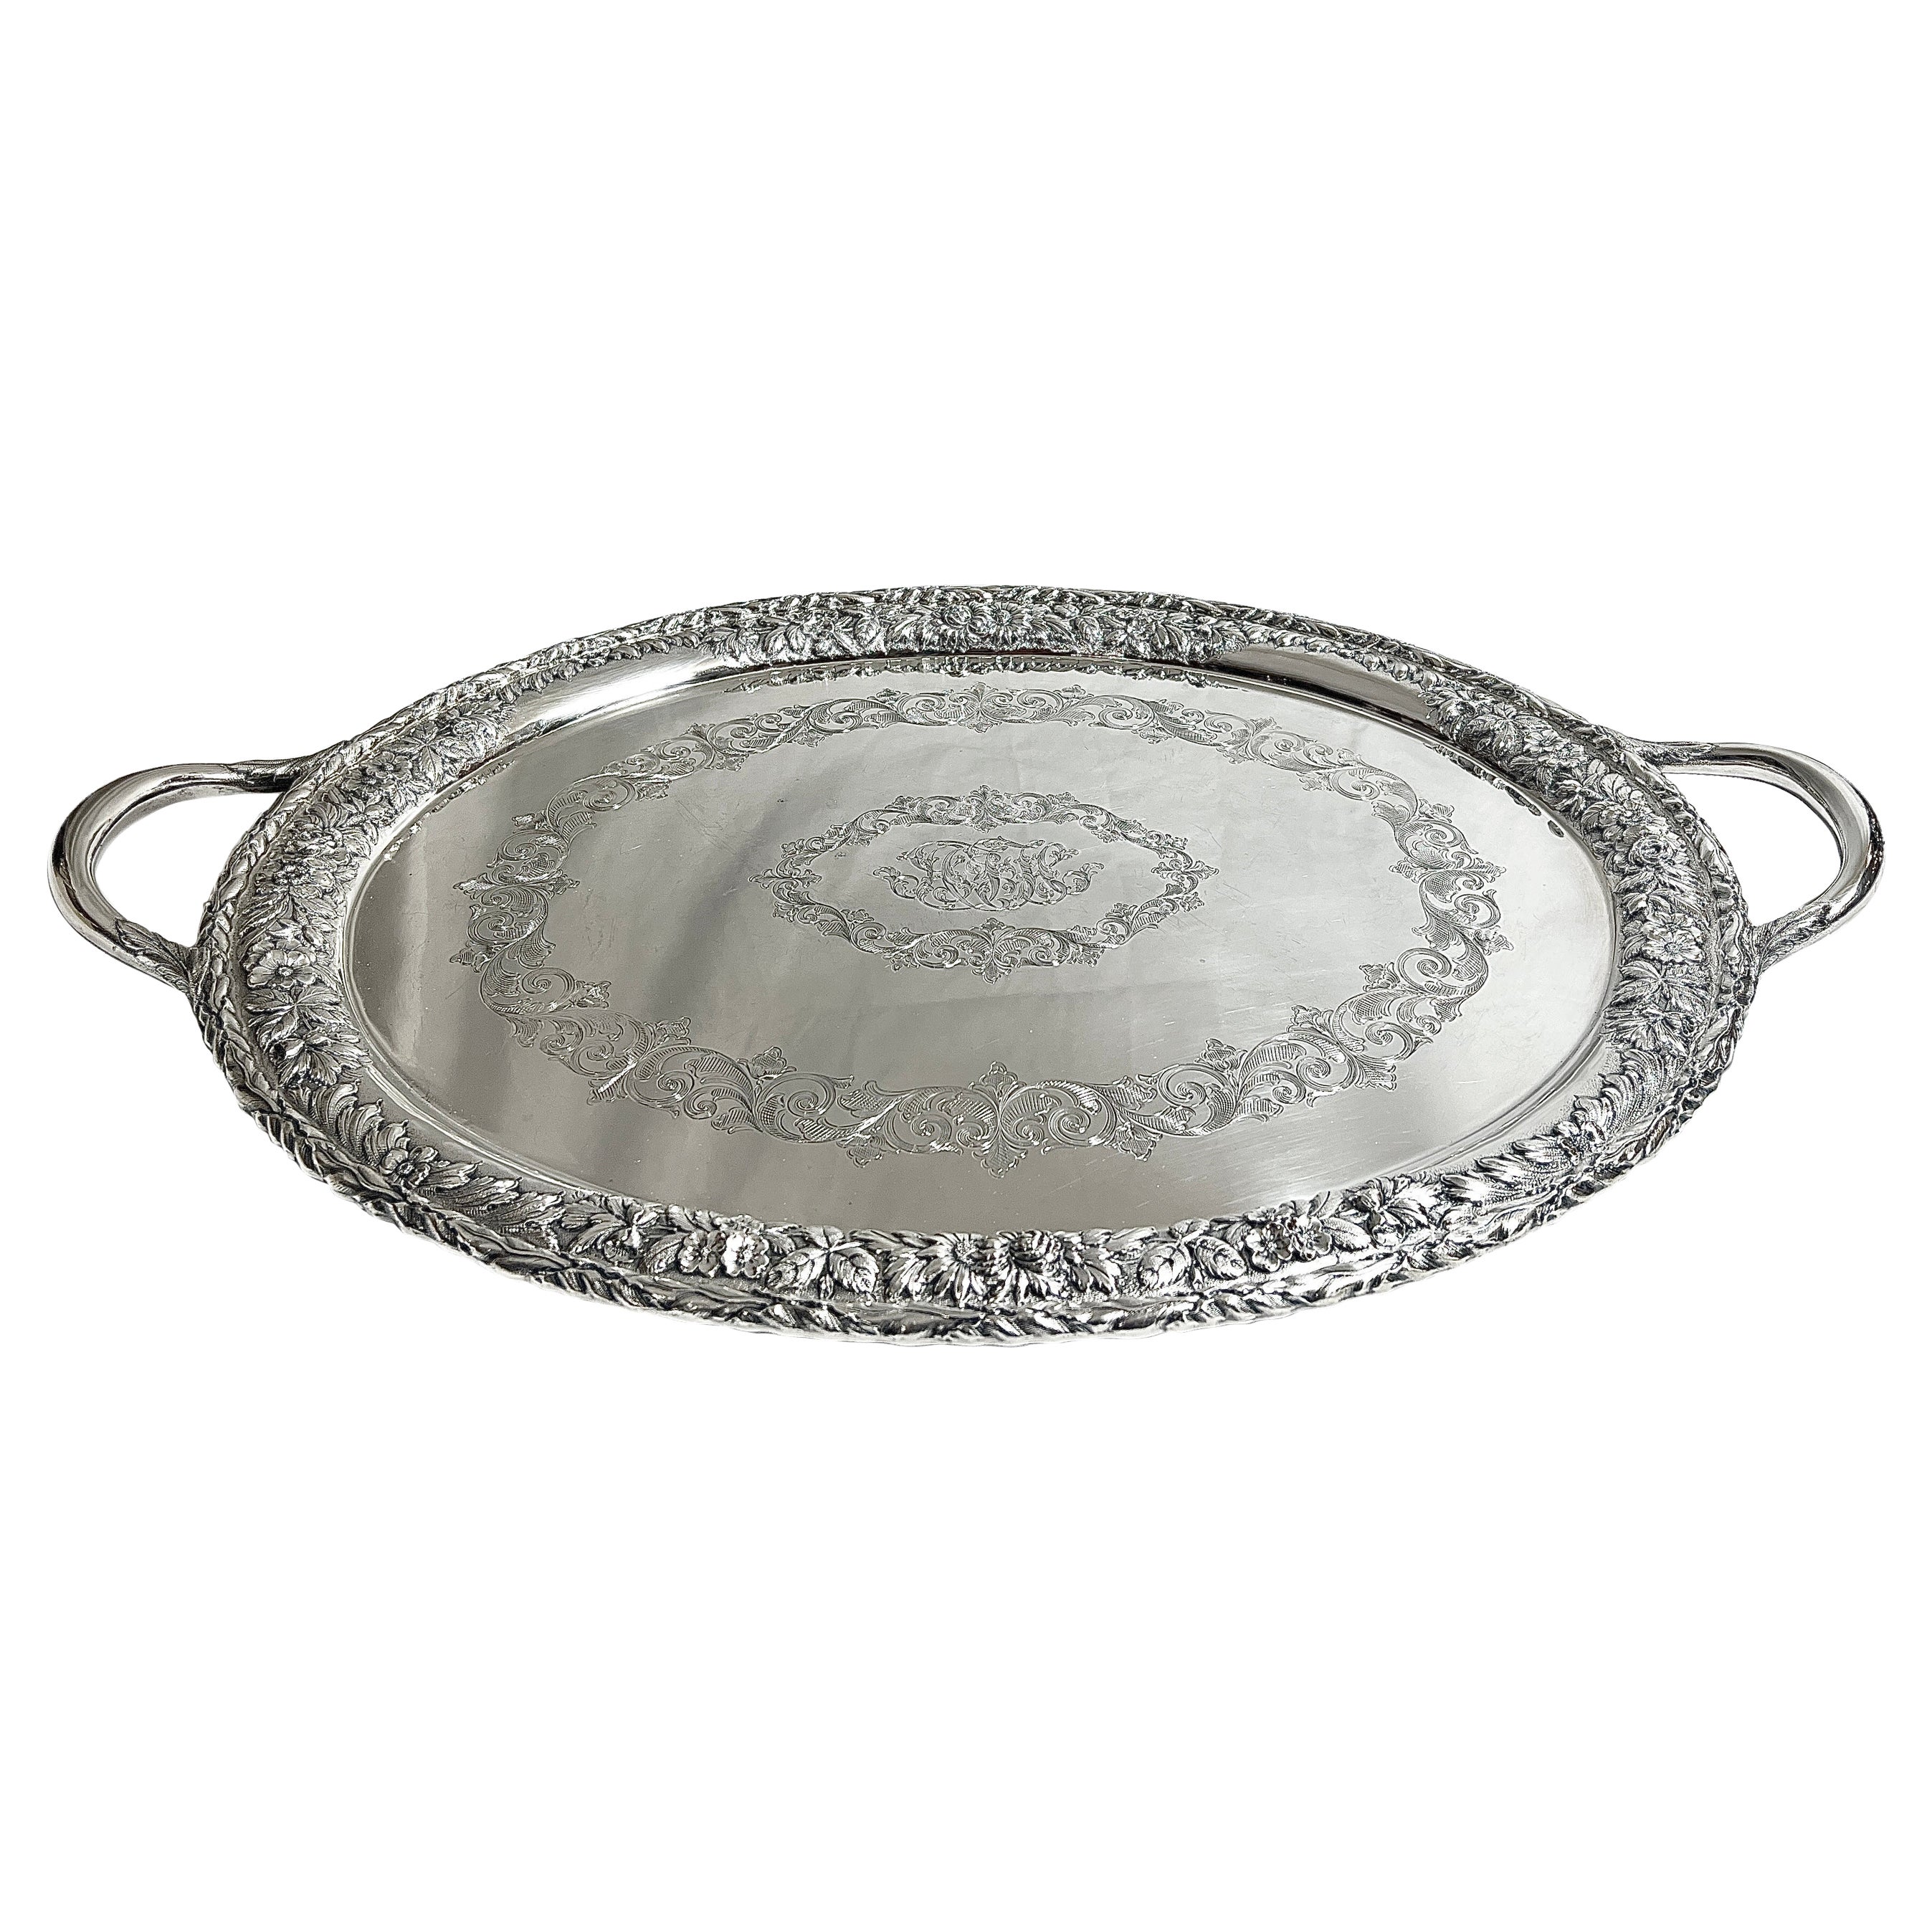 Antique Mid 19th Century American Sterling Silver Tray Made By "S. Kirk & Son."